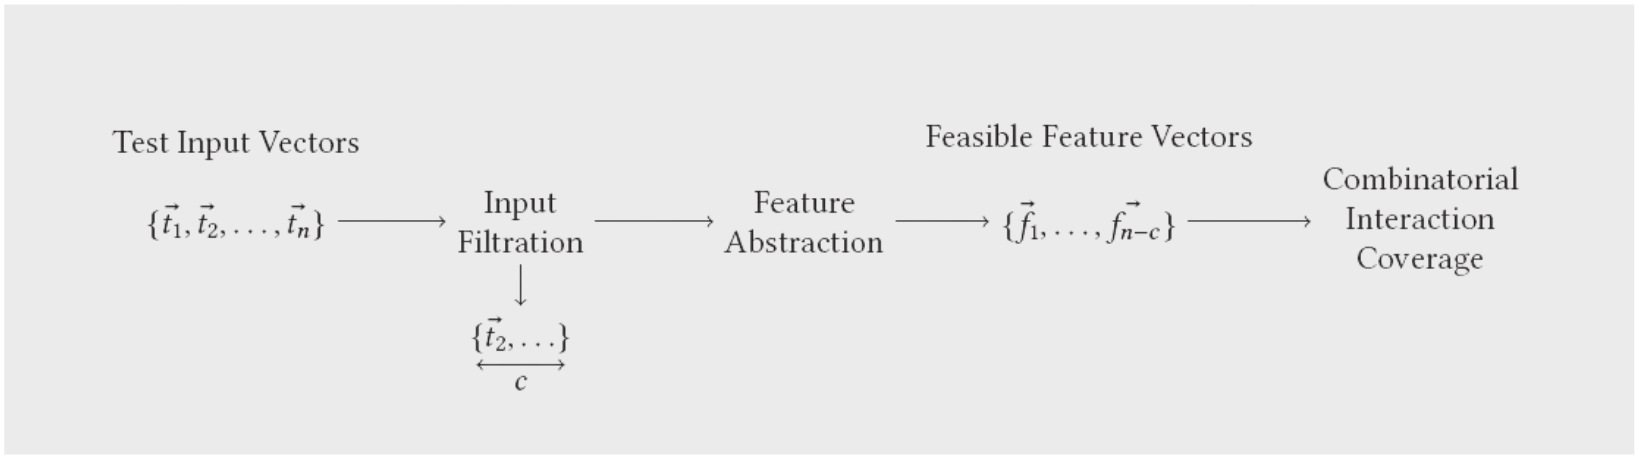 Input Distribution Coverage: Measuring Feature Interaction Adequacy in Neural Network Testing